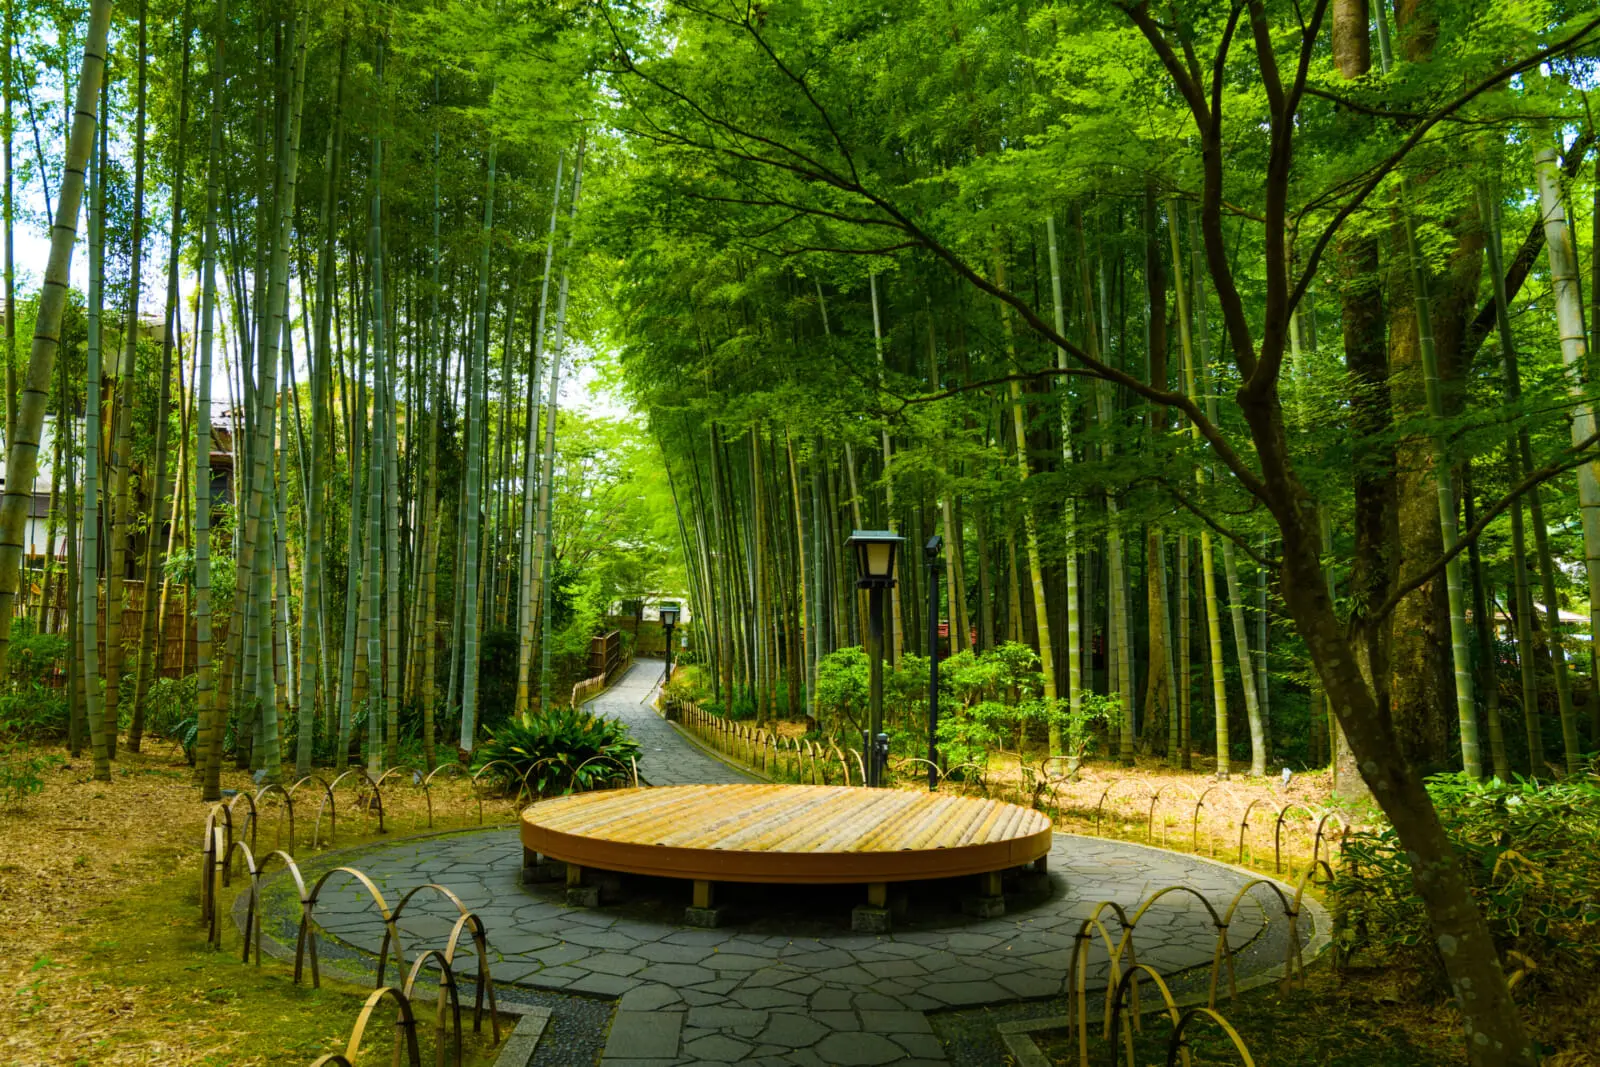 bamboo forest path